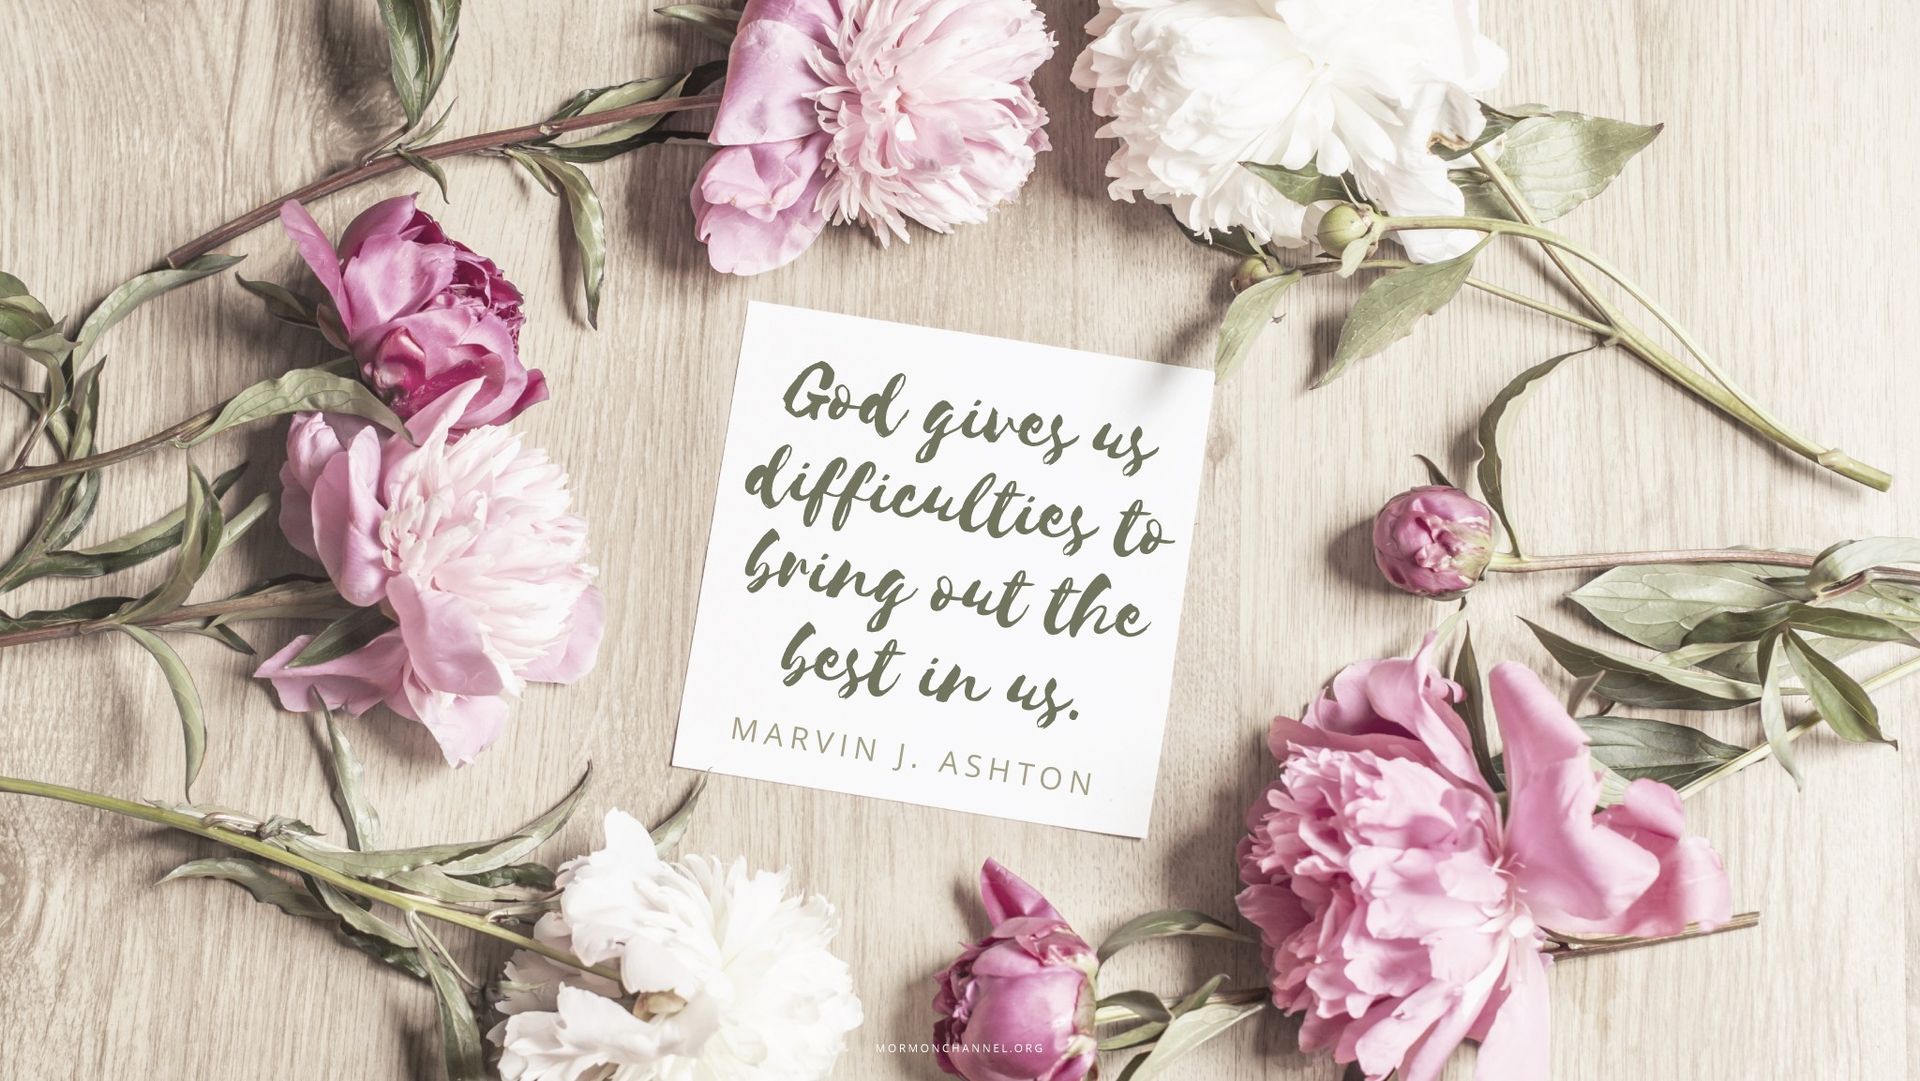 “God gives us difficulties to bring out the best in us.”—Elder Marvin J. Ashton, “A Pattern in All Things”